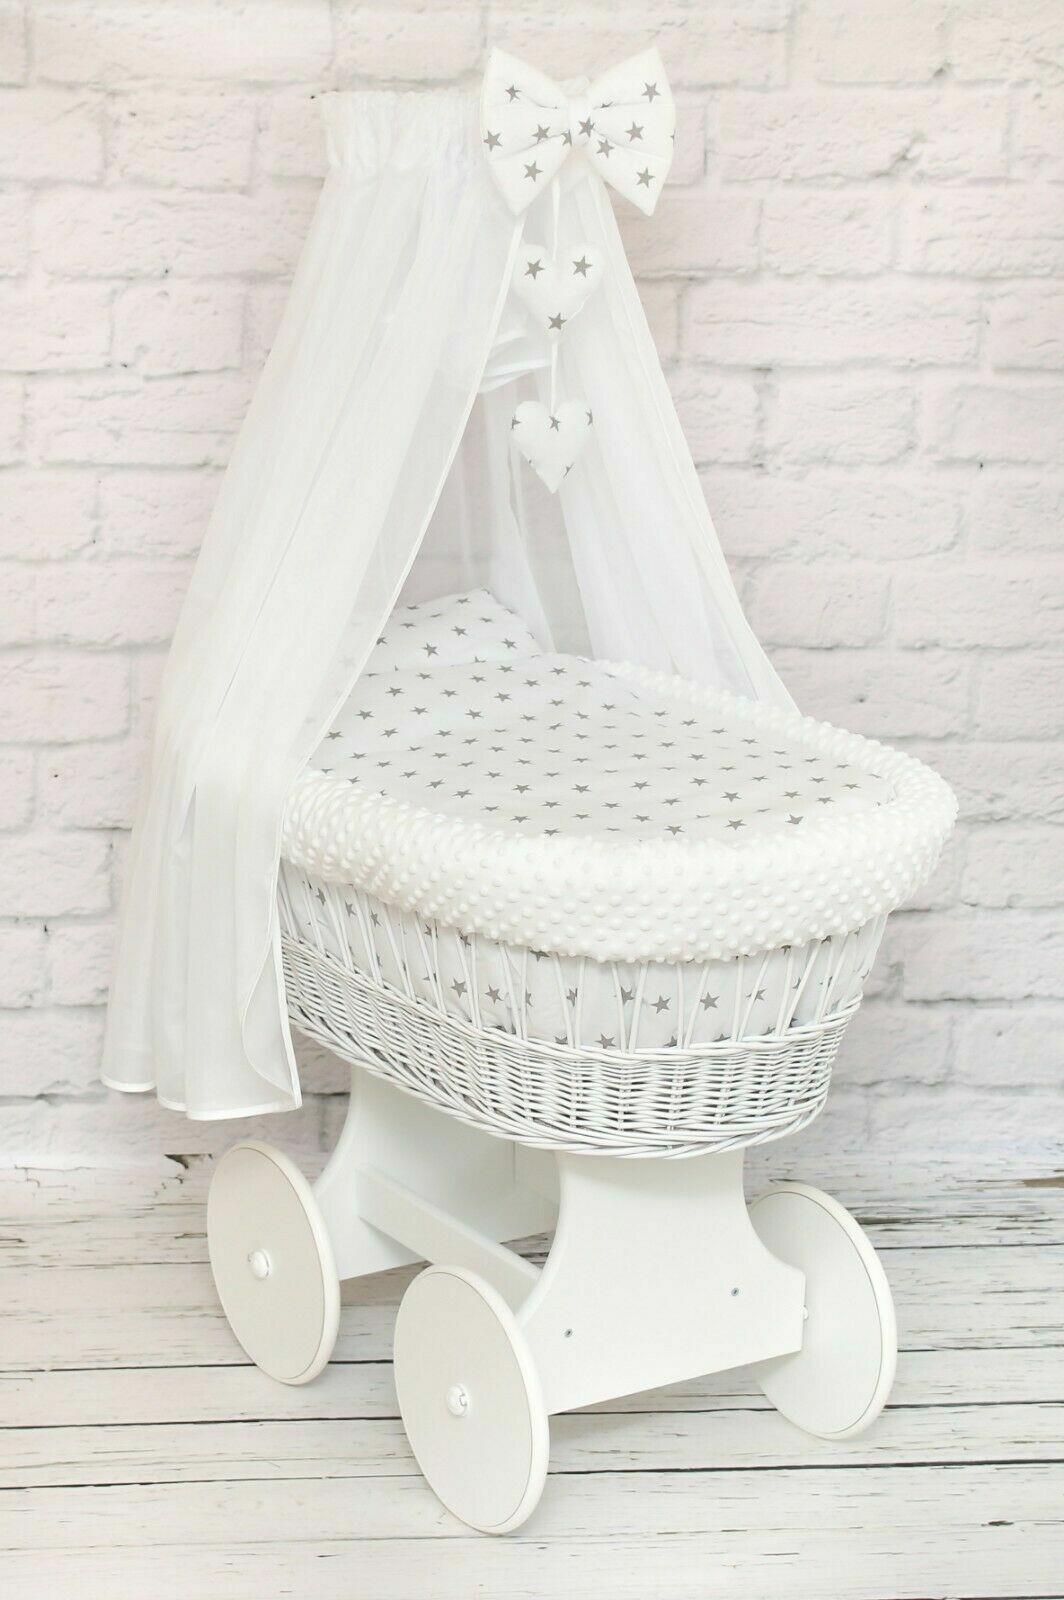 White Wicker Moses Basket with Wheels Baby+full Bedding Set Dimple White/ Small stars on White